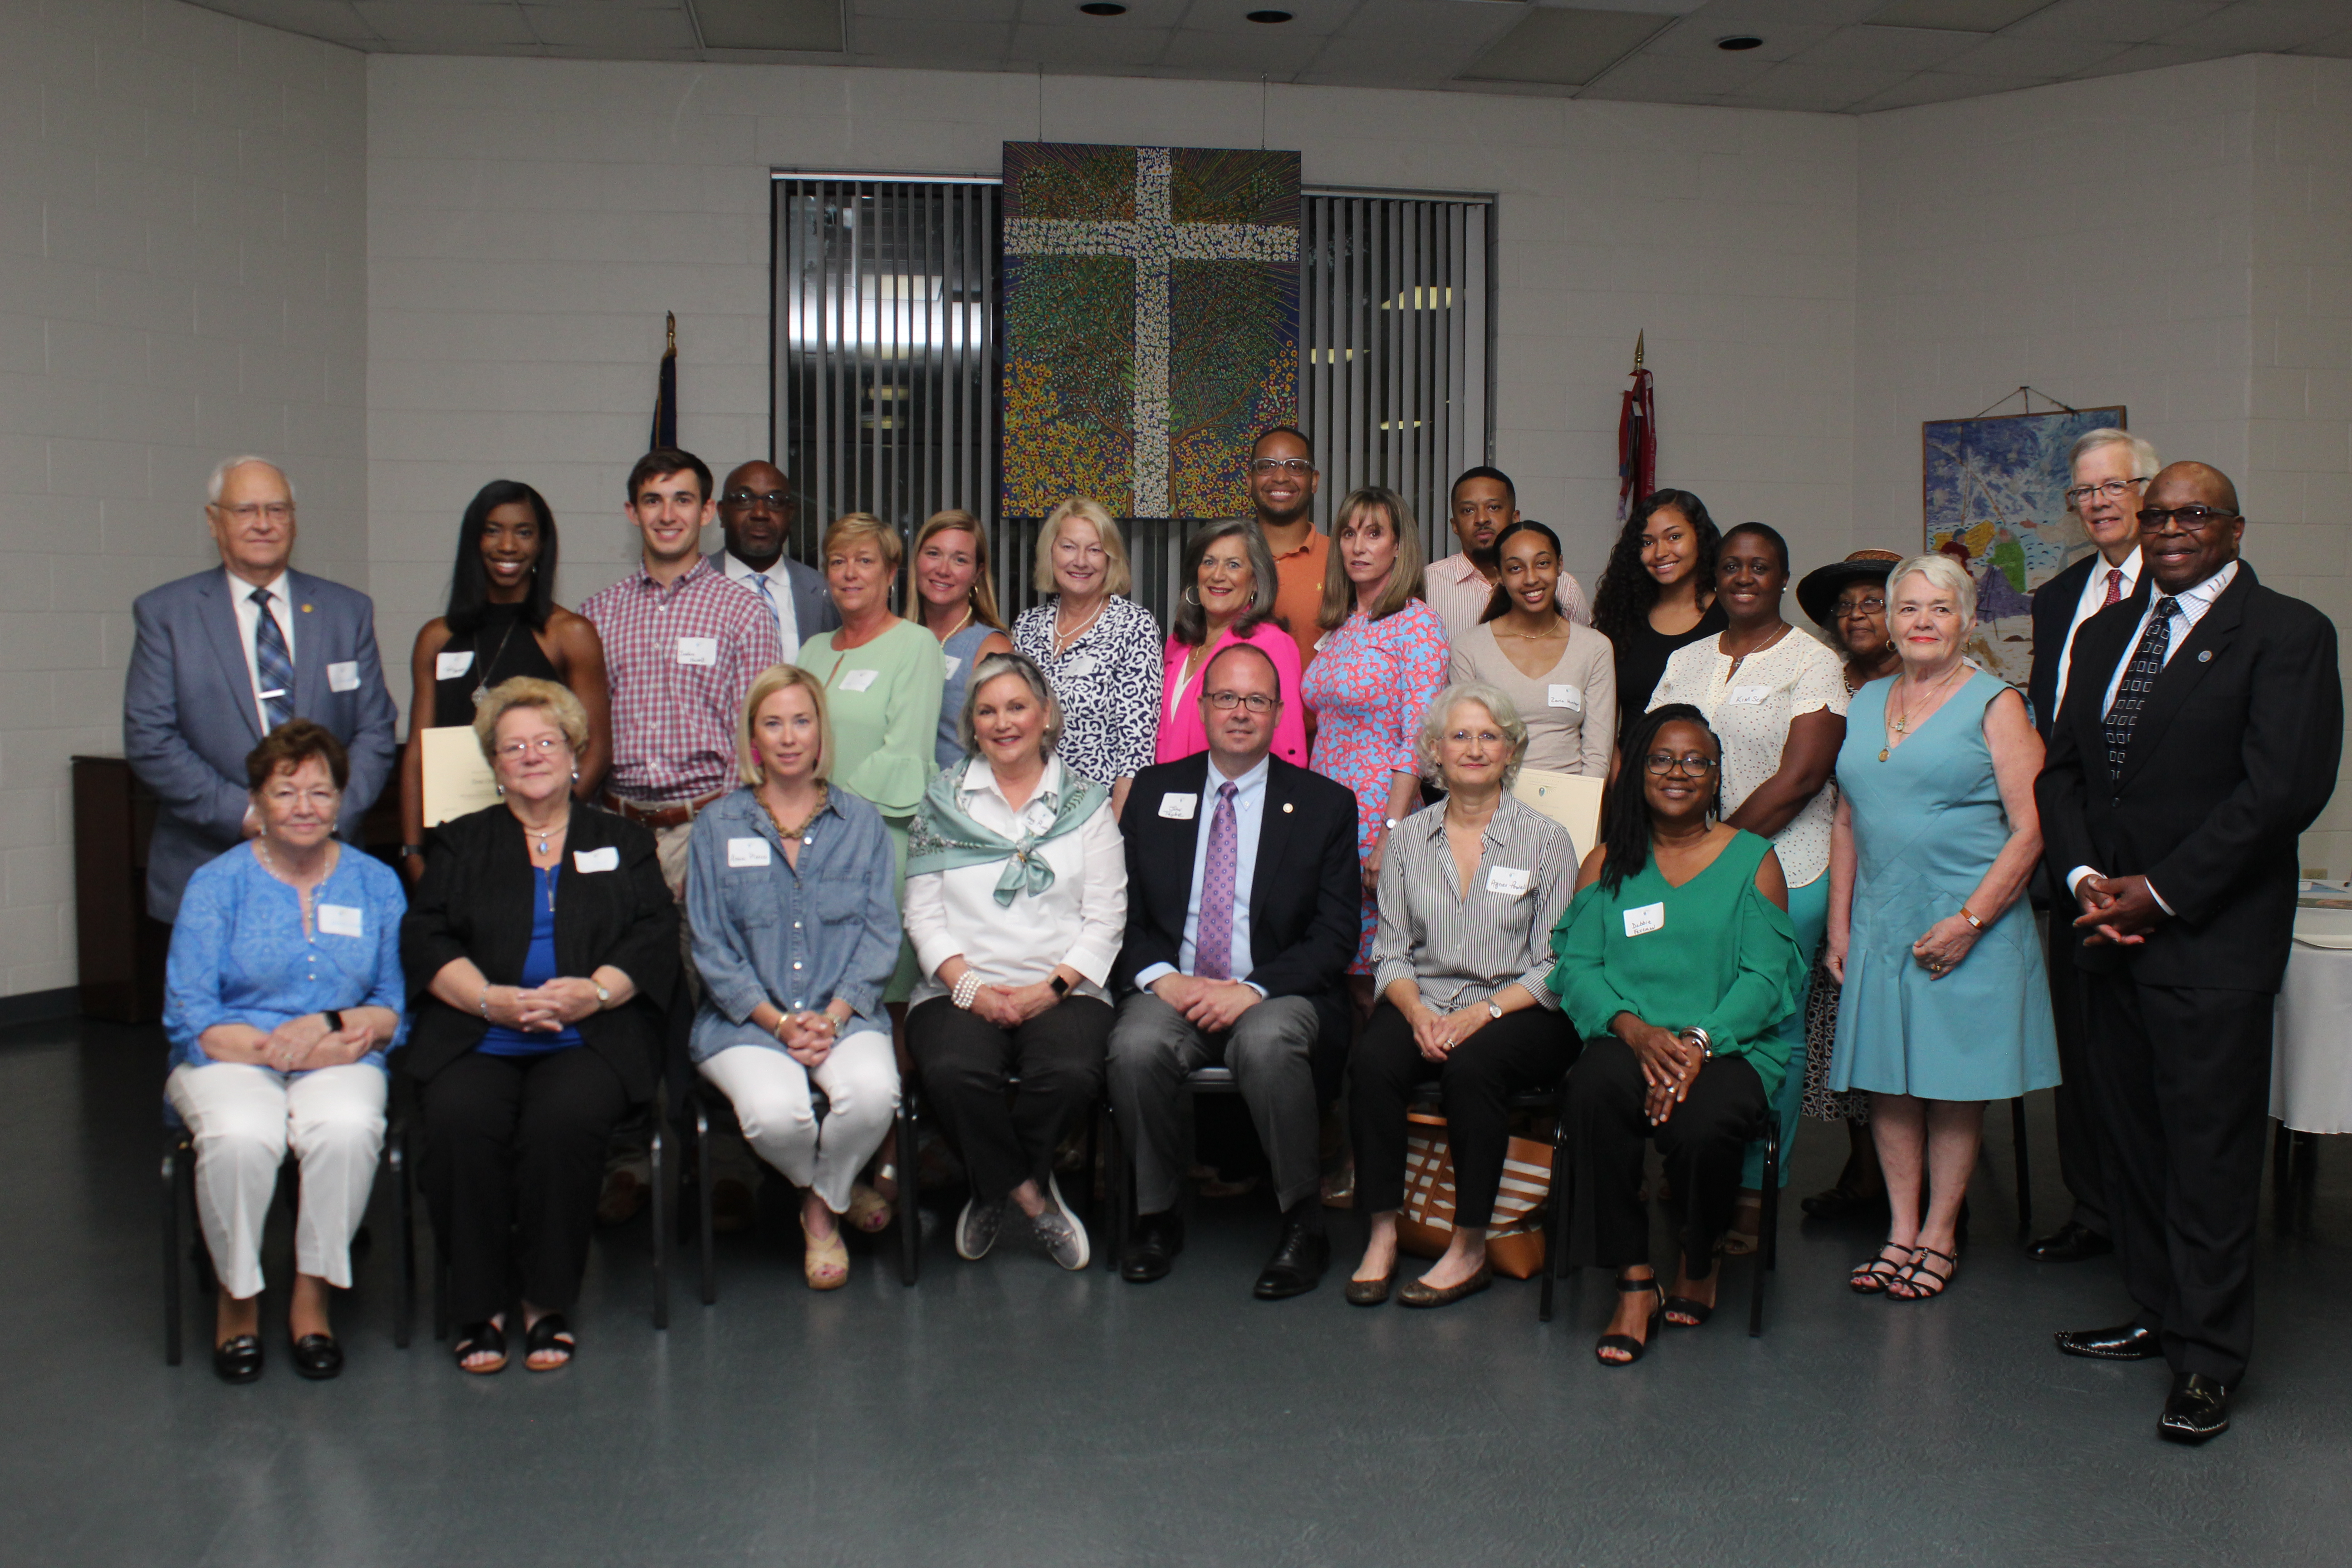 Members of the board of advisors of the Bertie-Hertford Community Foundation with local grants and scholarships recipients at the annual awards ceremony.